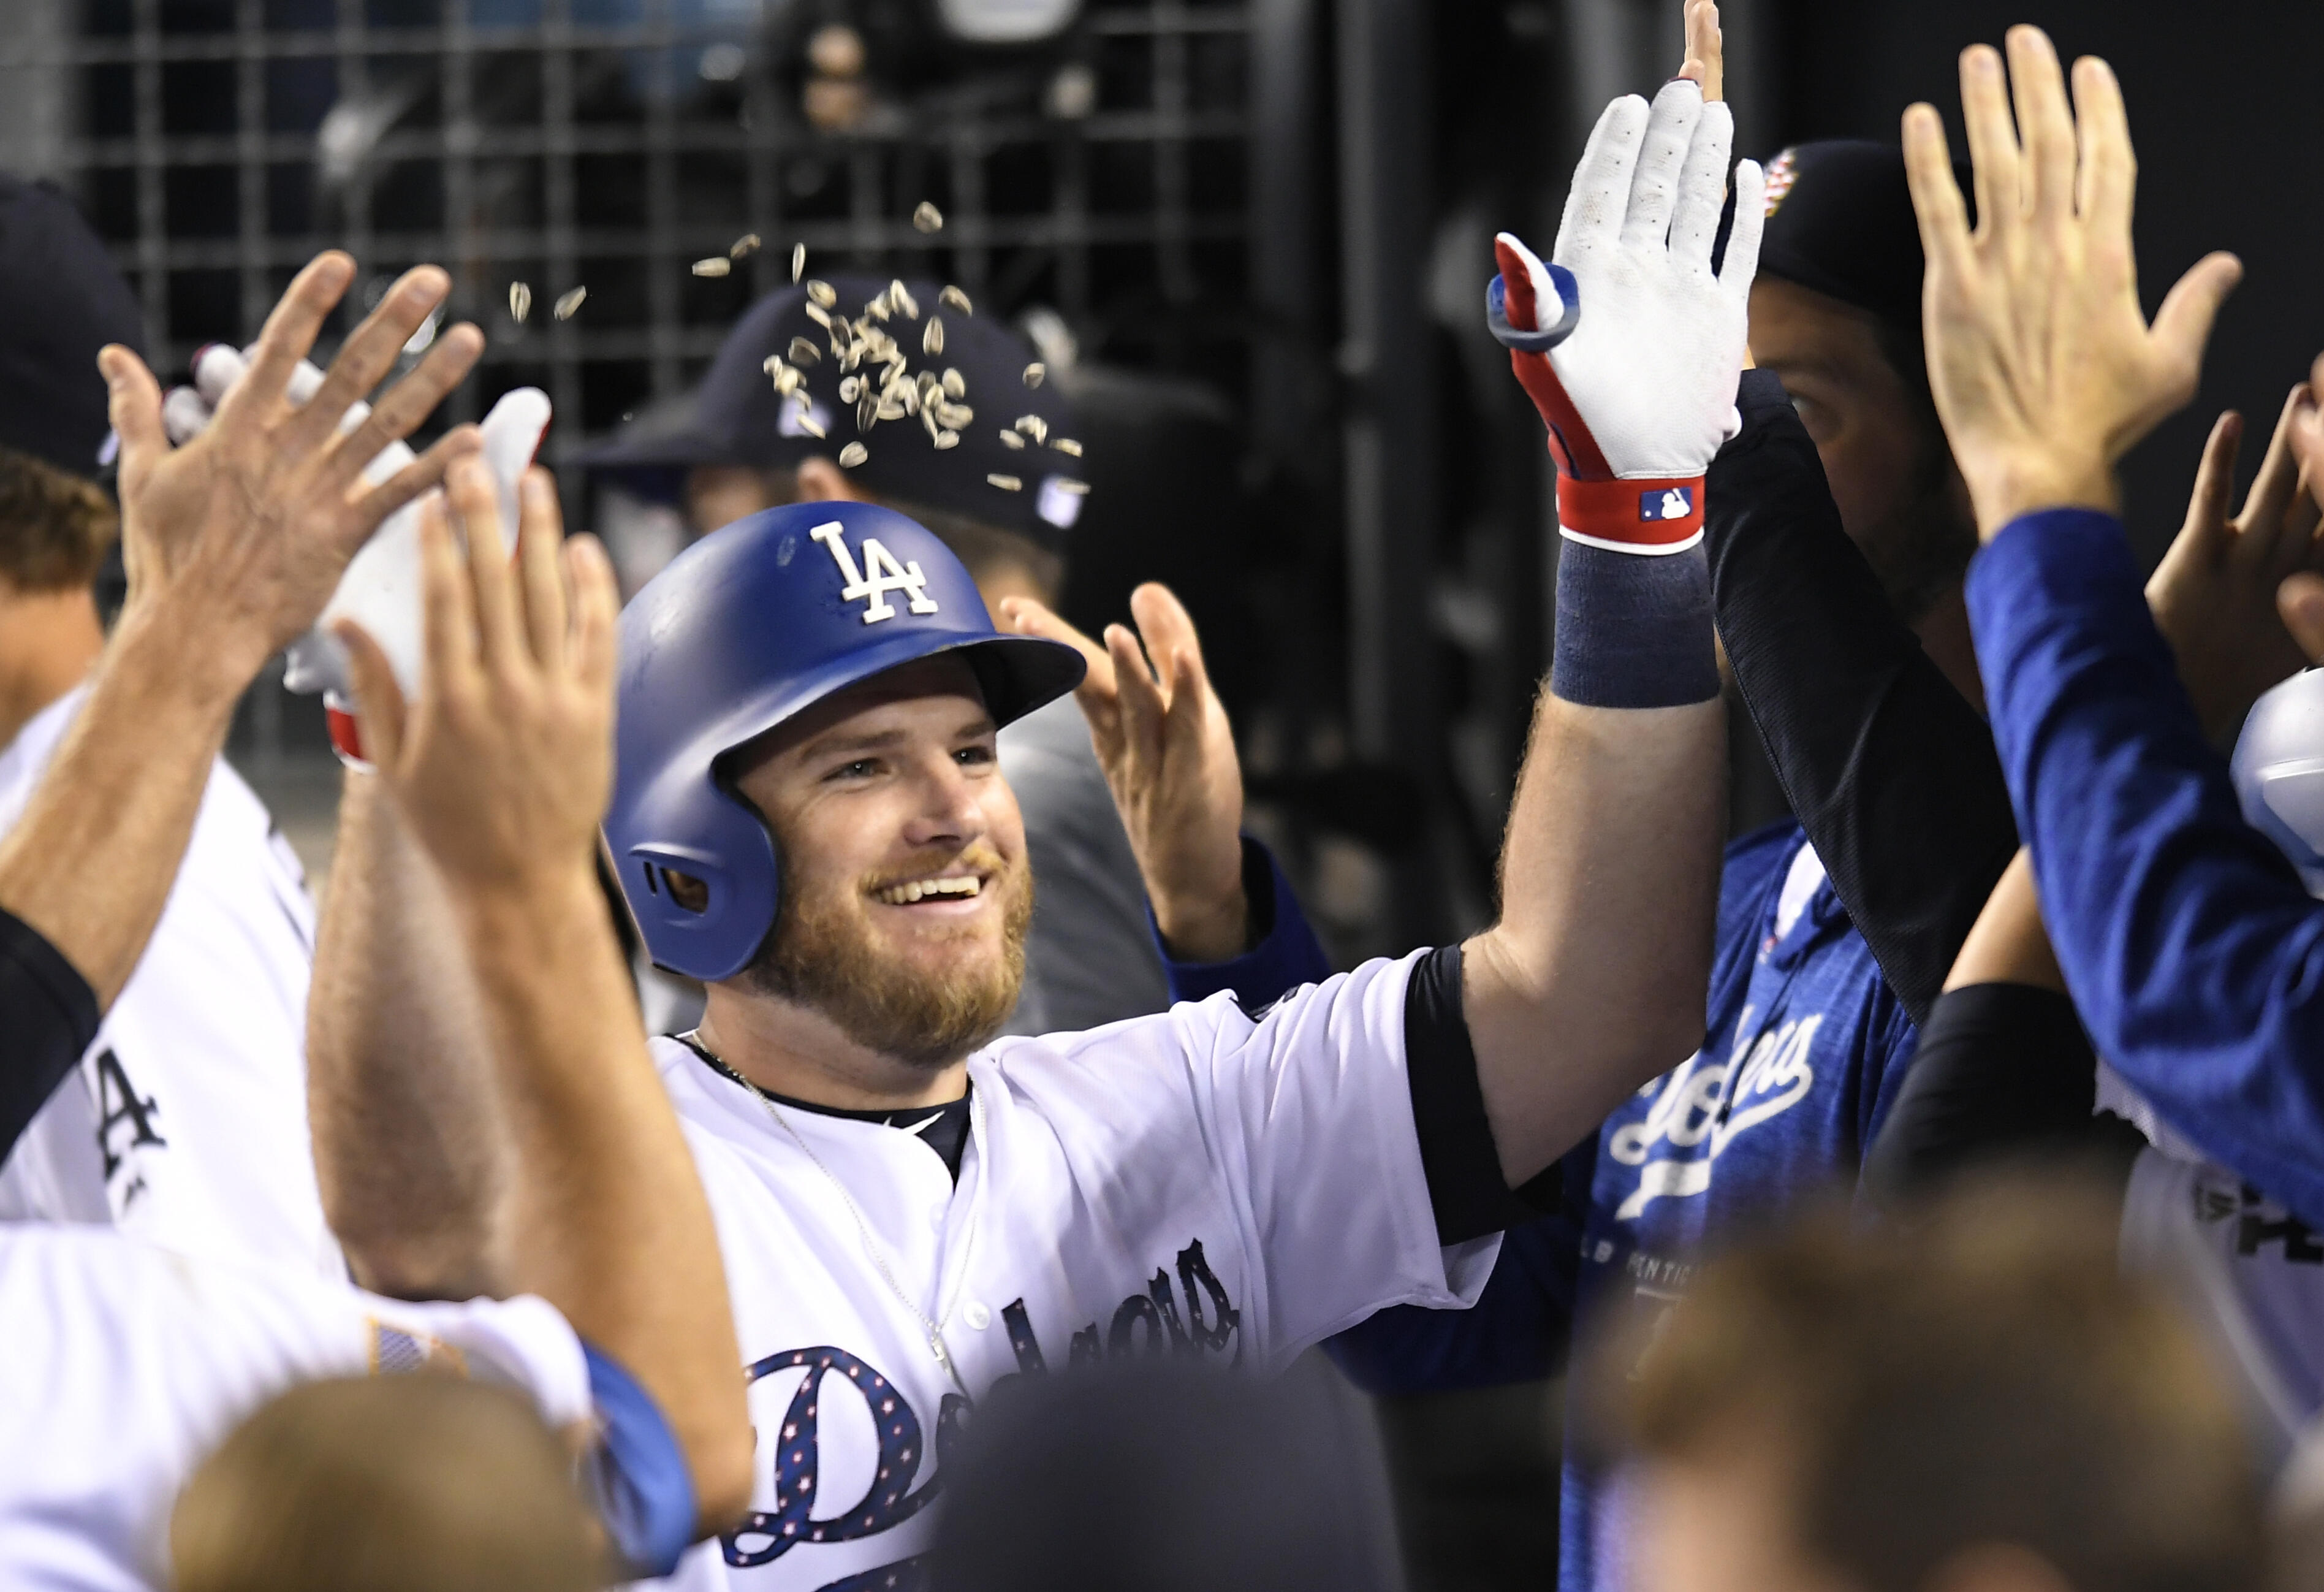 Final Vote: Send Max Muncy To The All-Star Game - Thumbnail Image